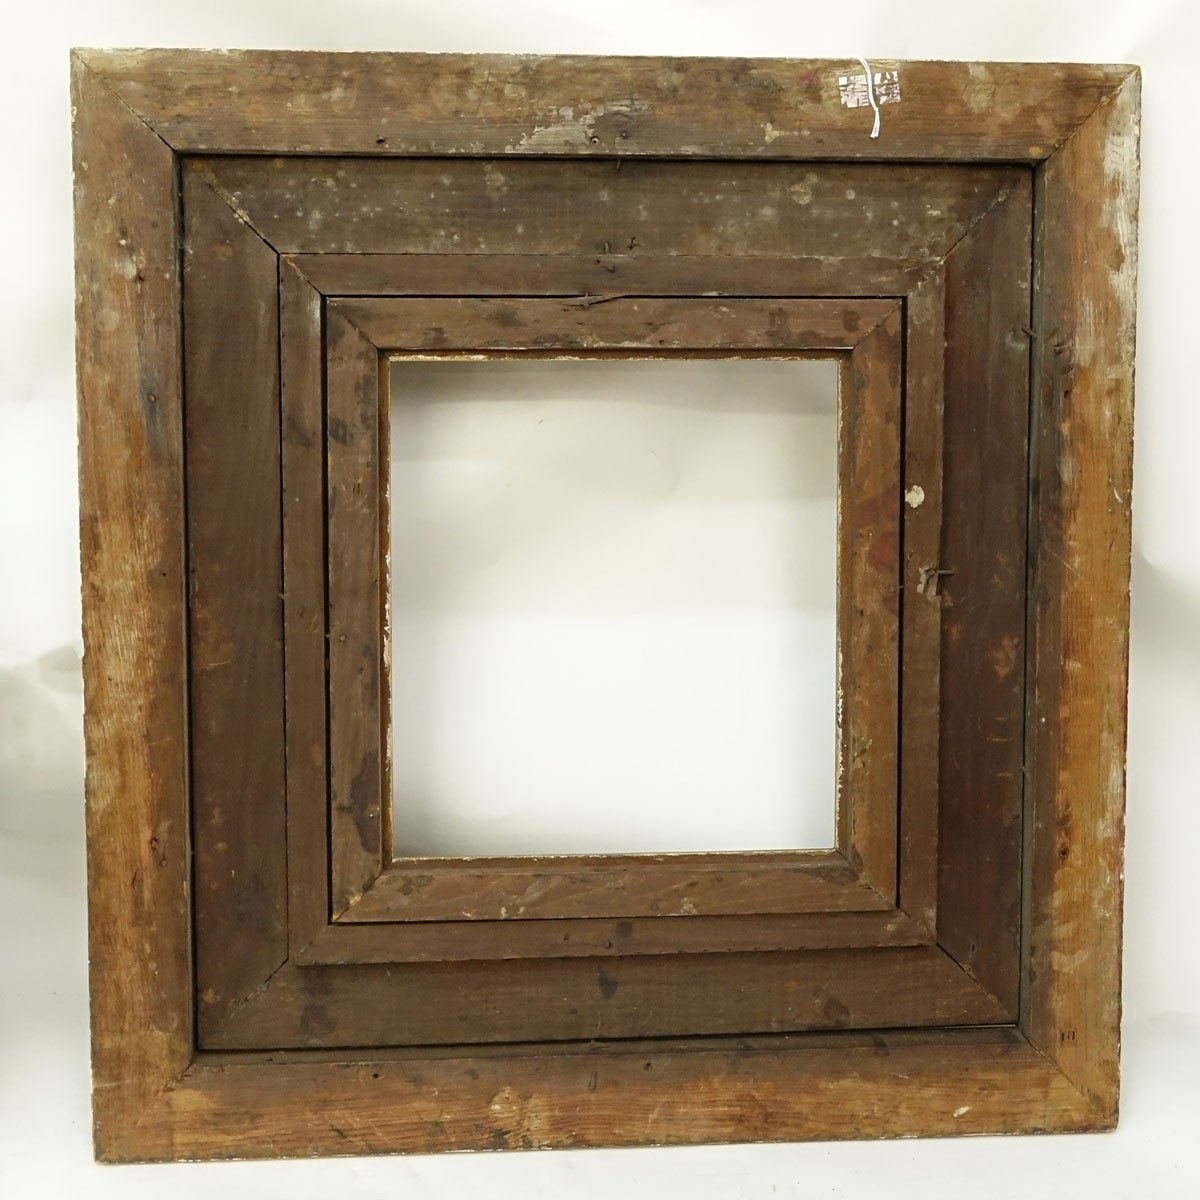 Antique Ornate Gilt Carved Wood and Gesso Frame. Condition consistent with age, some losses and cracks, rubbing.